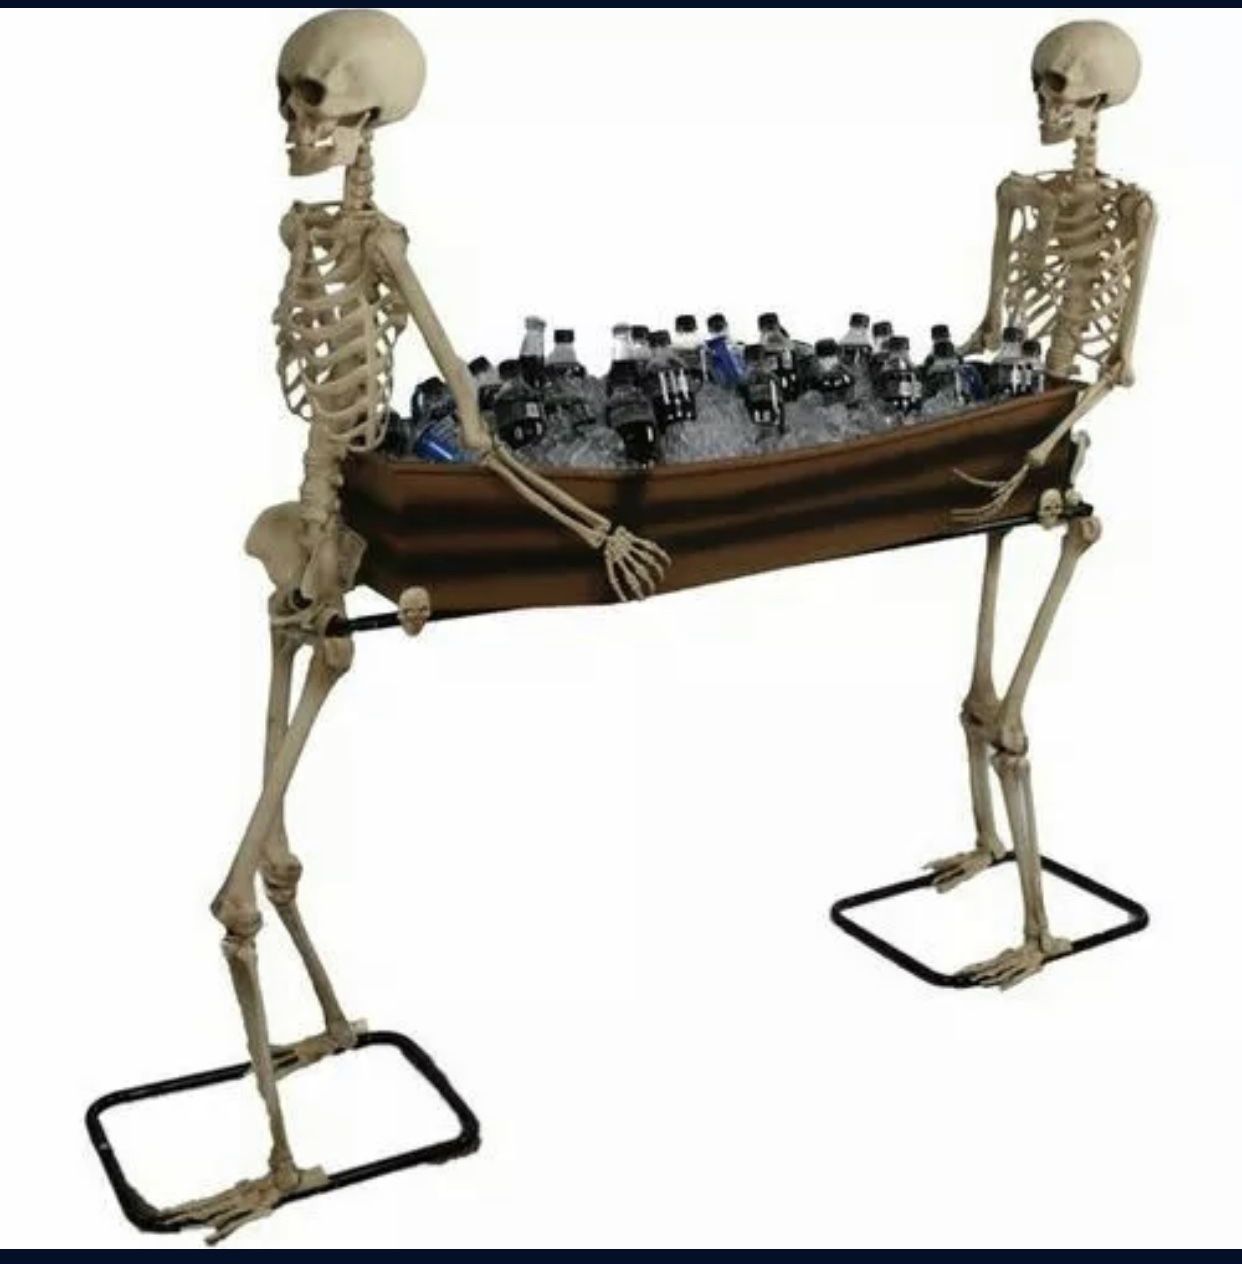 Halloween 2021 - Way To Celebrate 5 Ft. Skeleton Duo Carrying 47” Coffin 